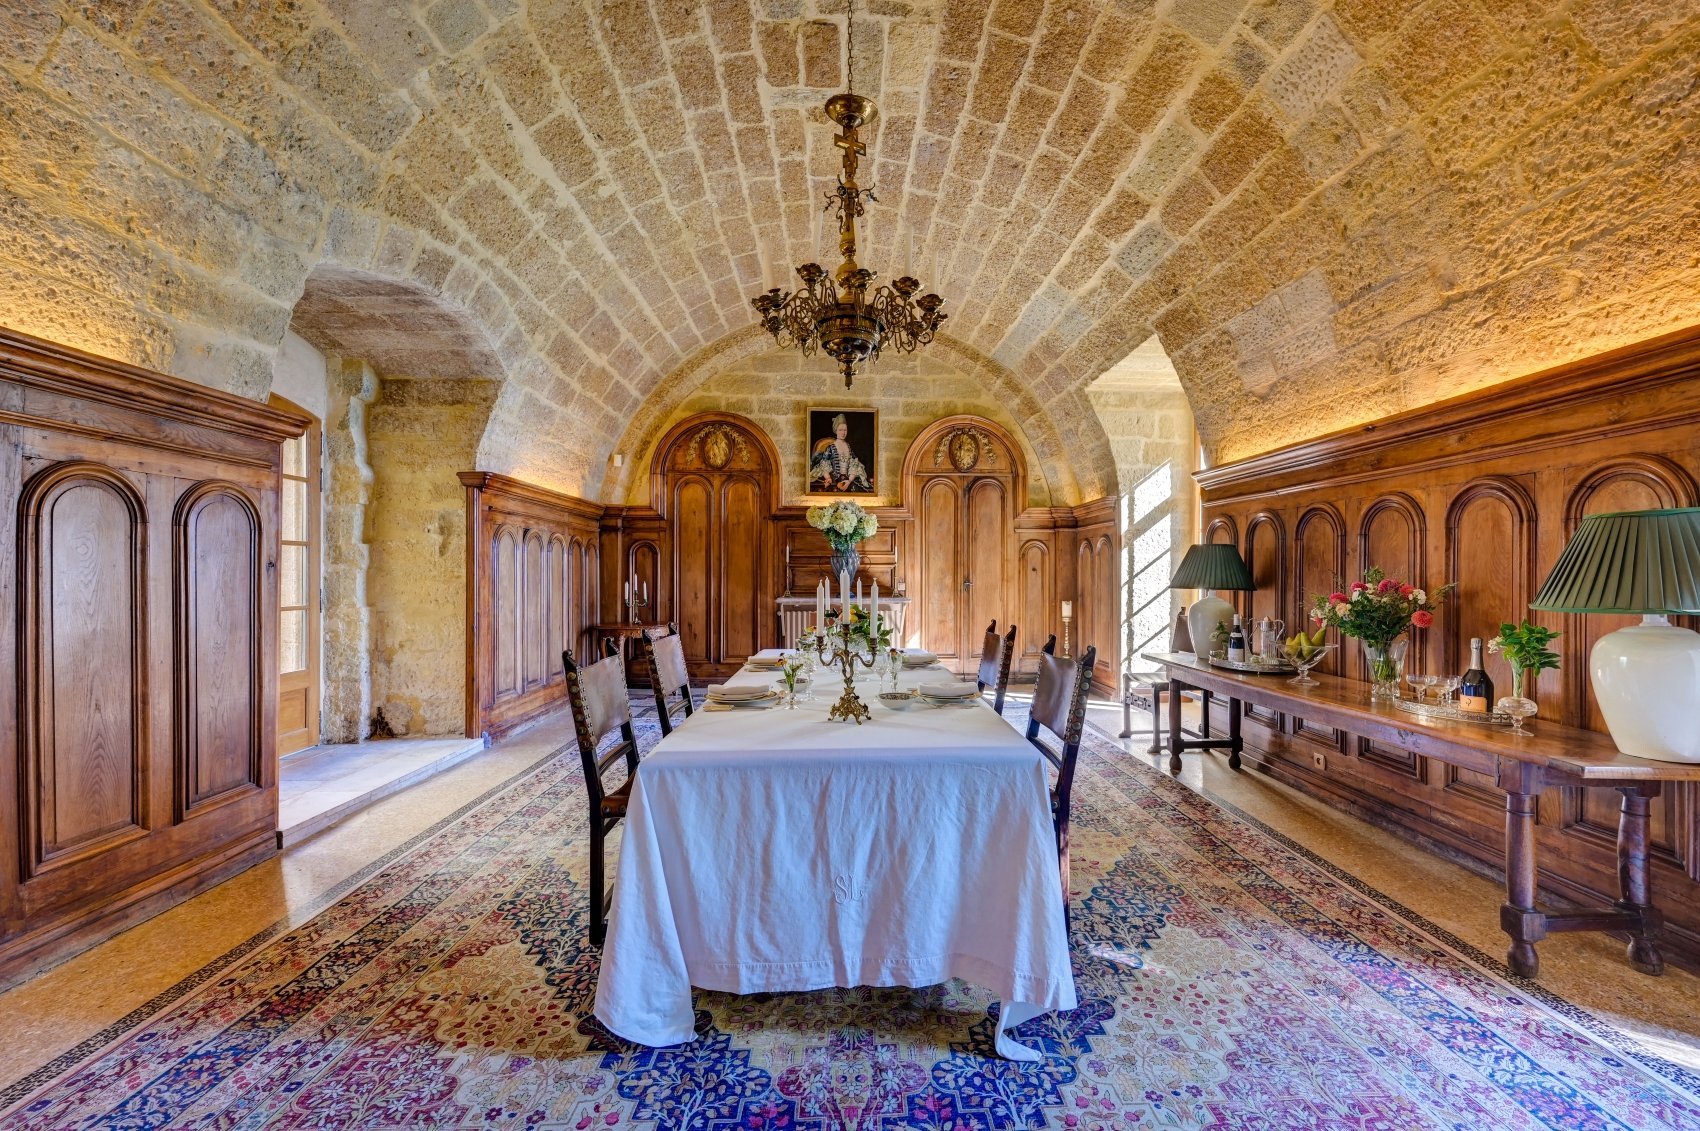 Luxury chateau to rent for your vacations or seminars